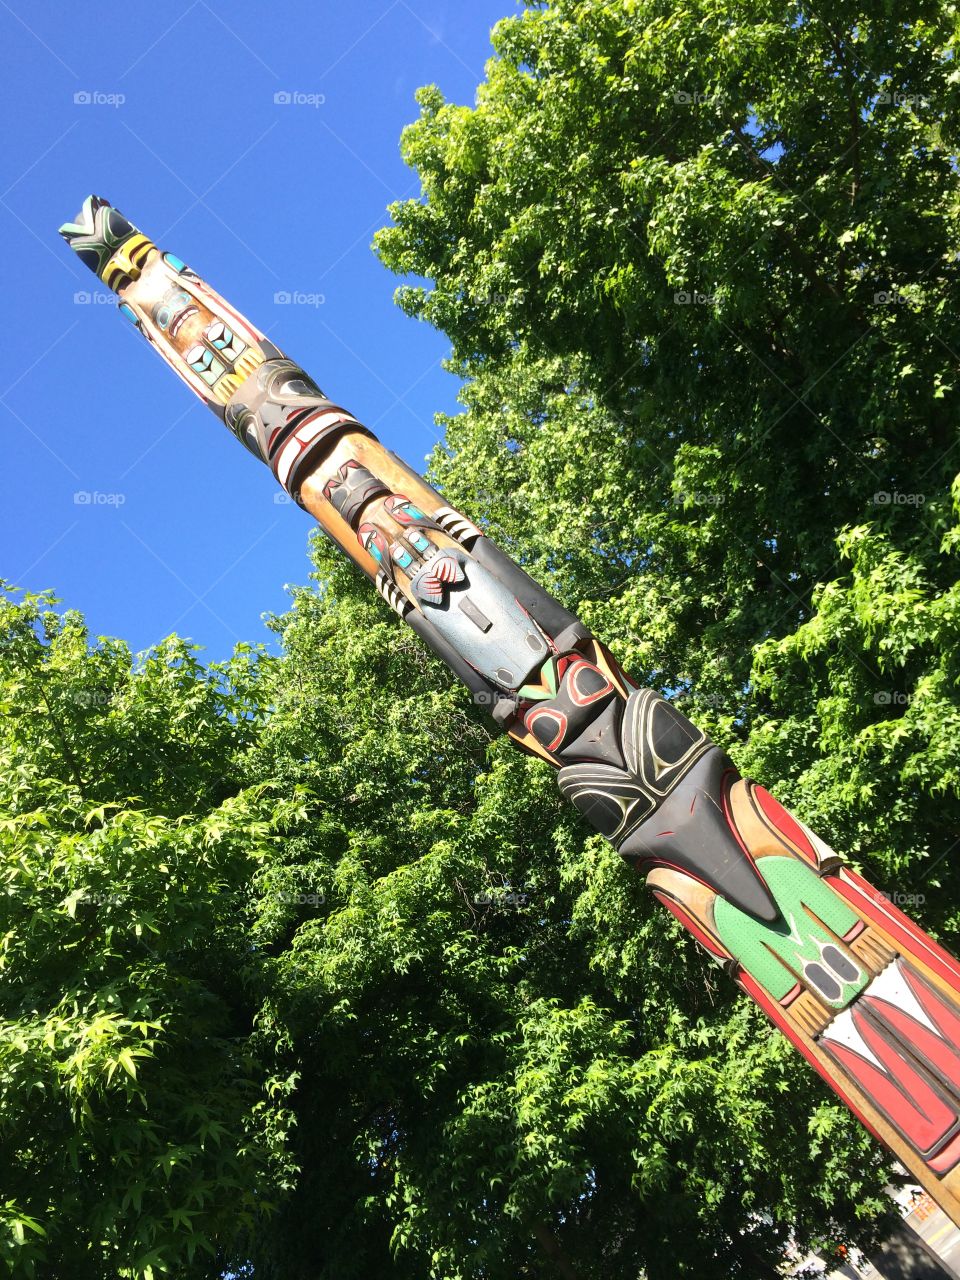 Looking Up at Totem Pole . Totem pole against sky 